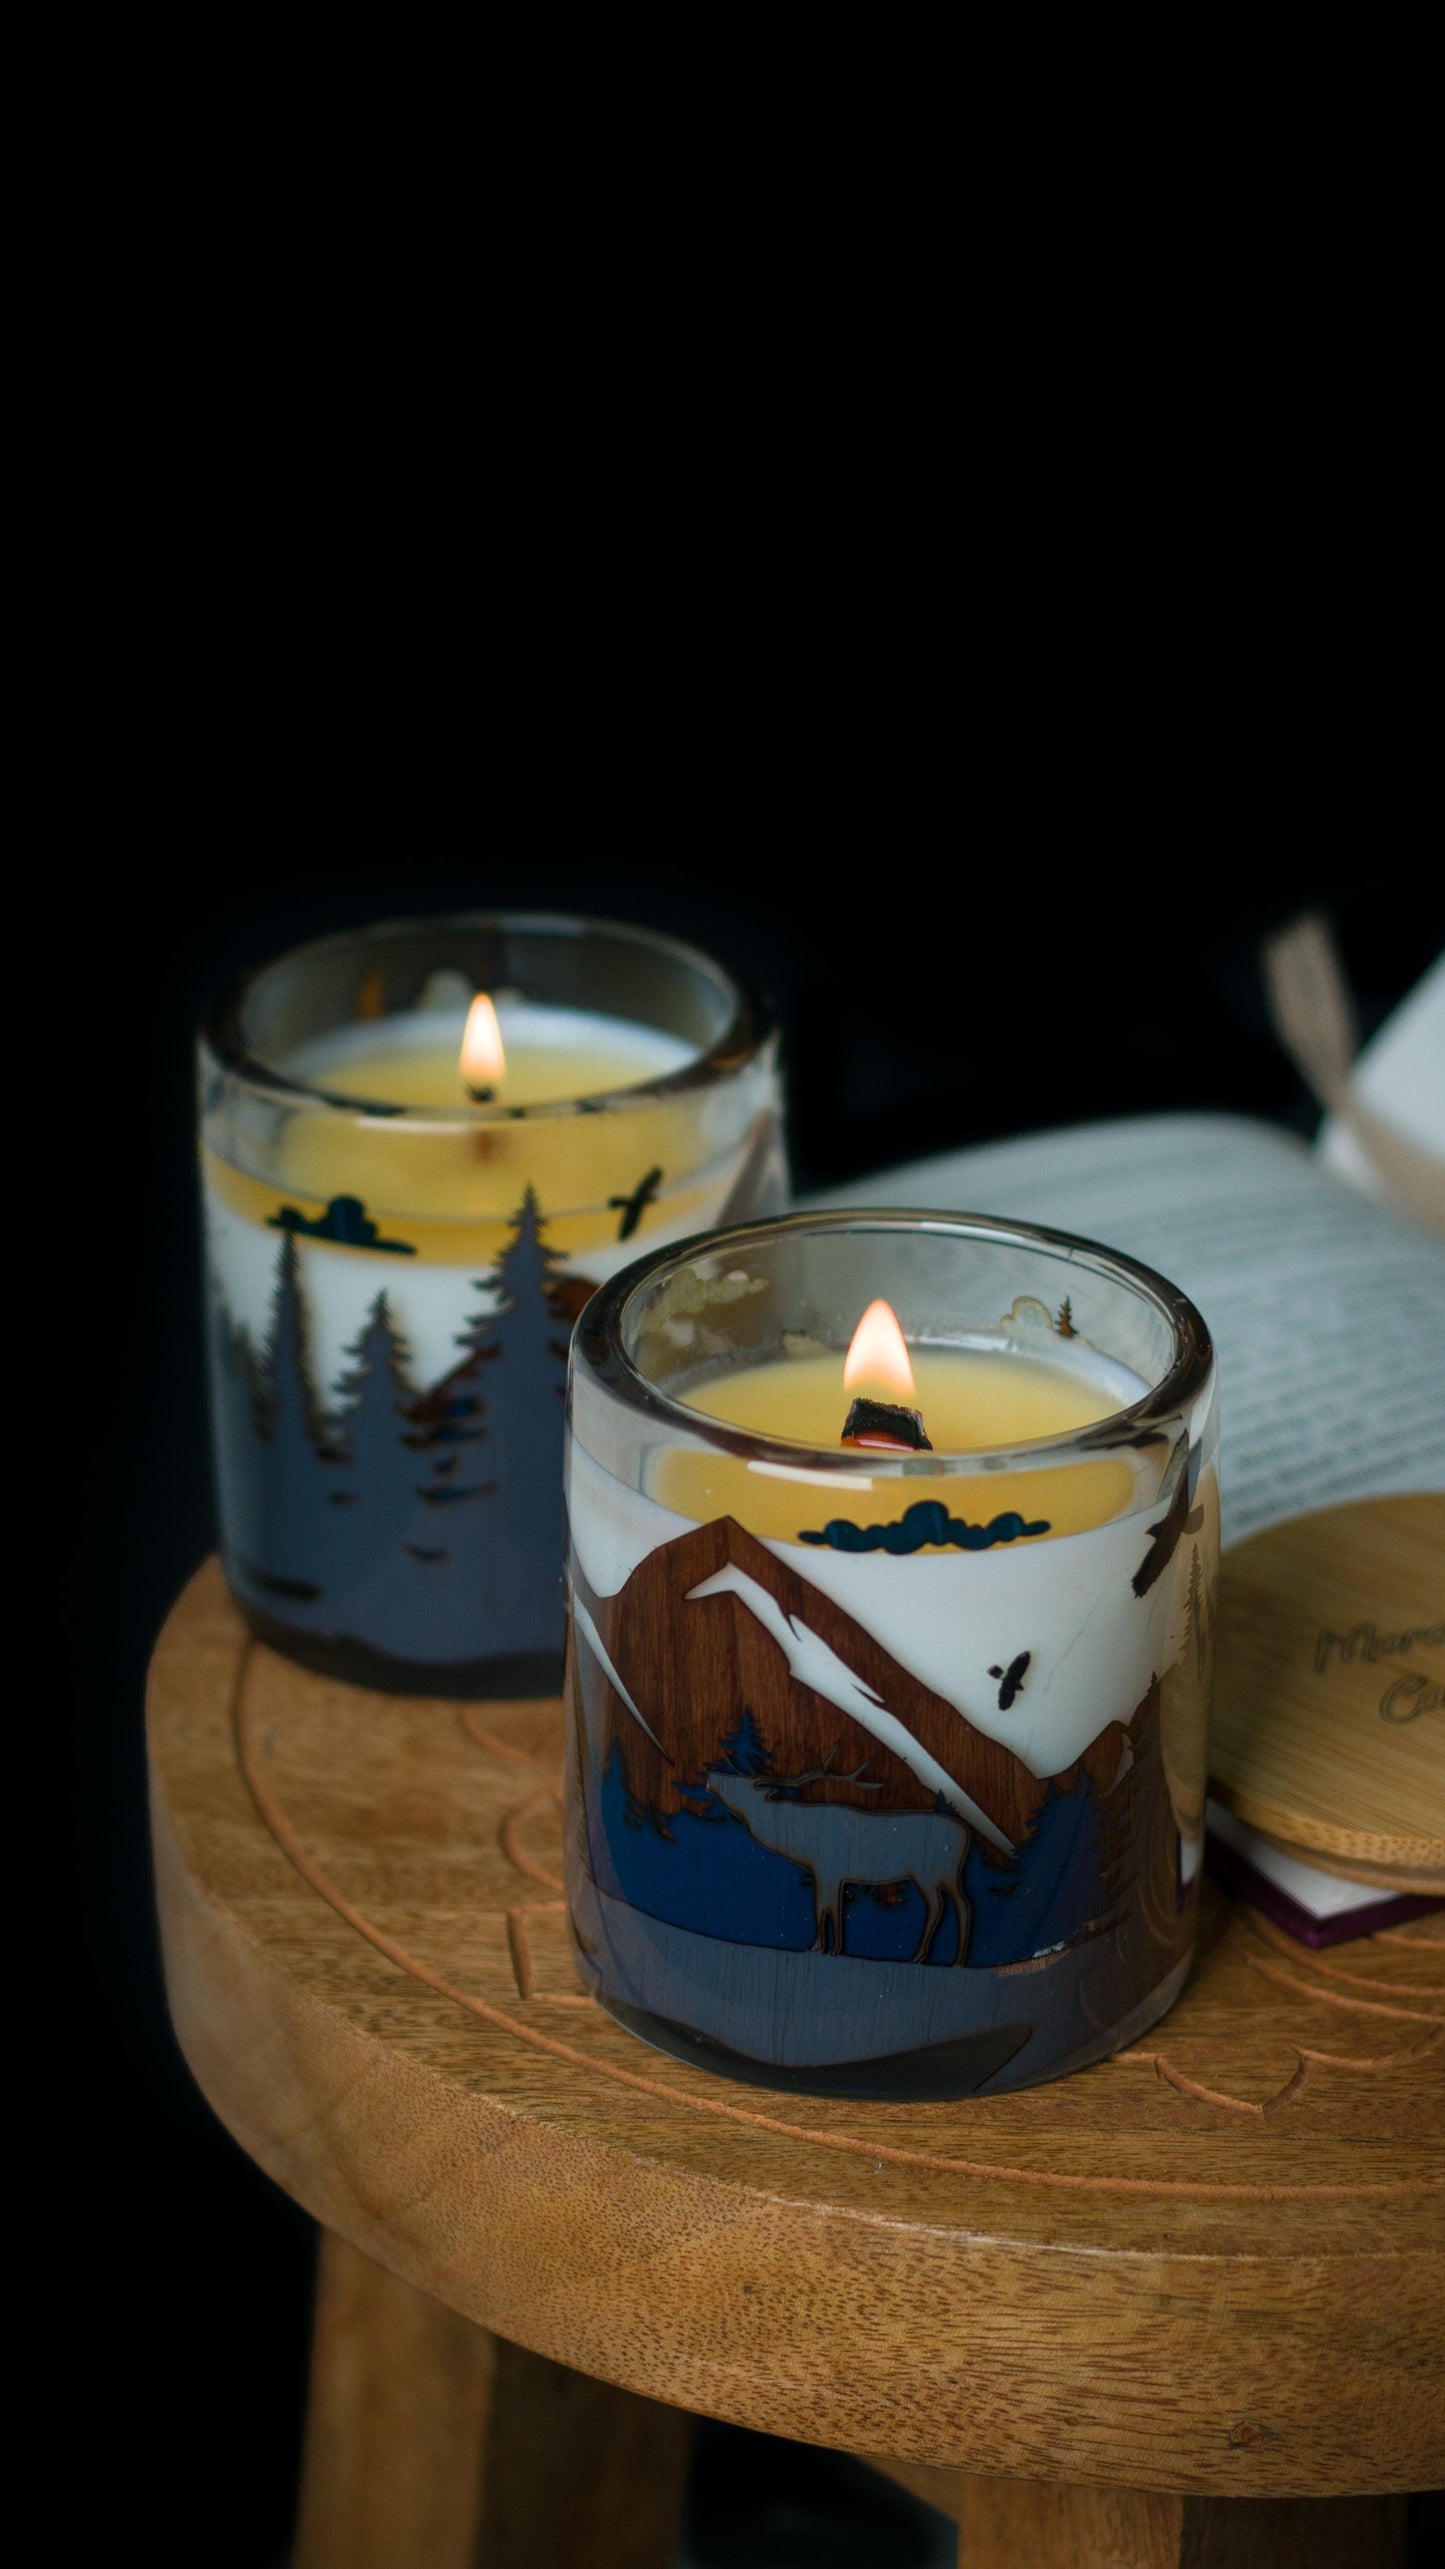 Soy Candle in Handmade Candlestick "Deer in Woods"